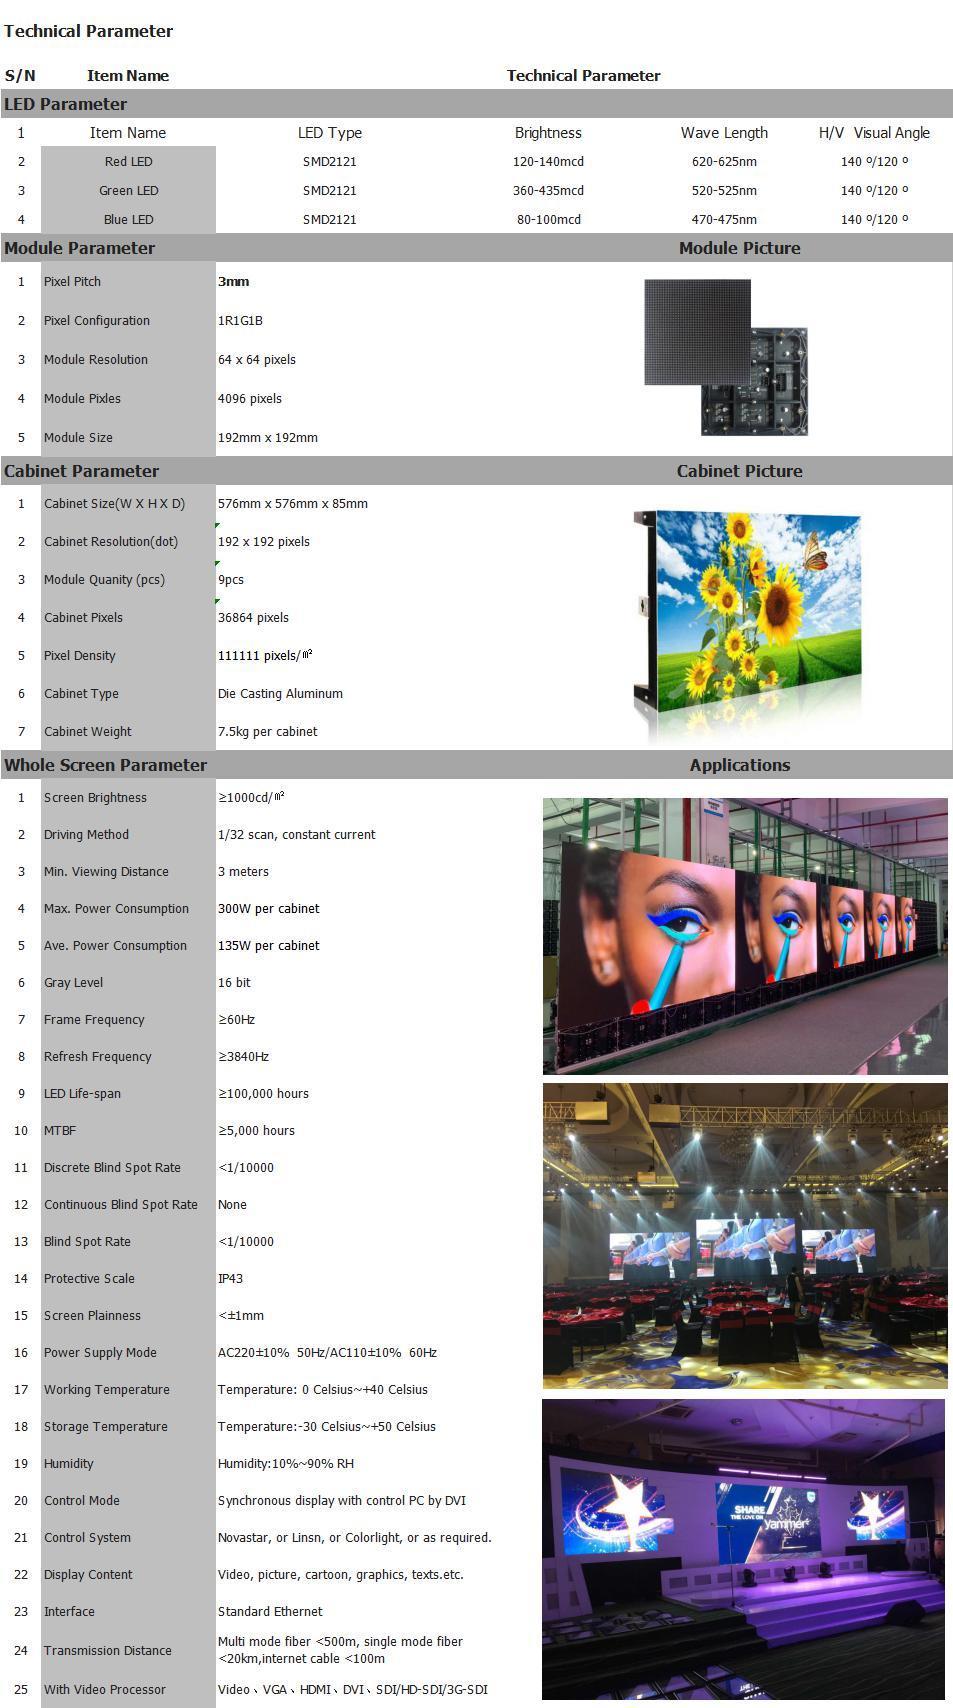 P3 Video Screen Module Stage Performance Indoor Application LED Display Wall